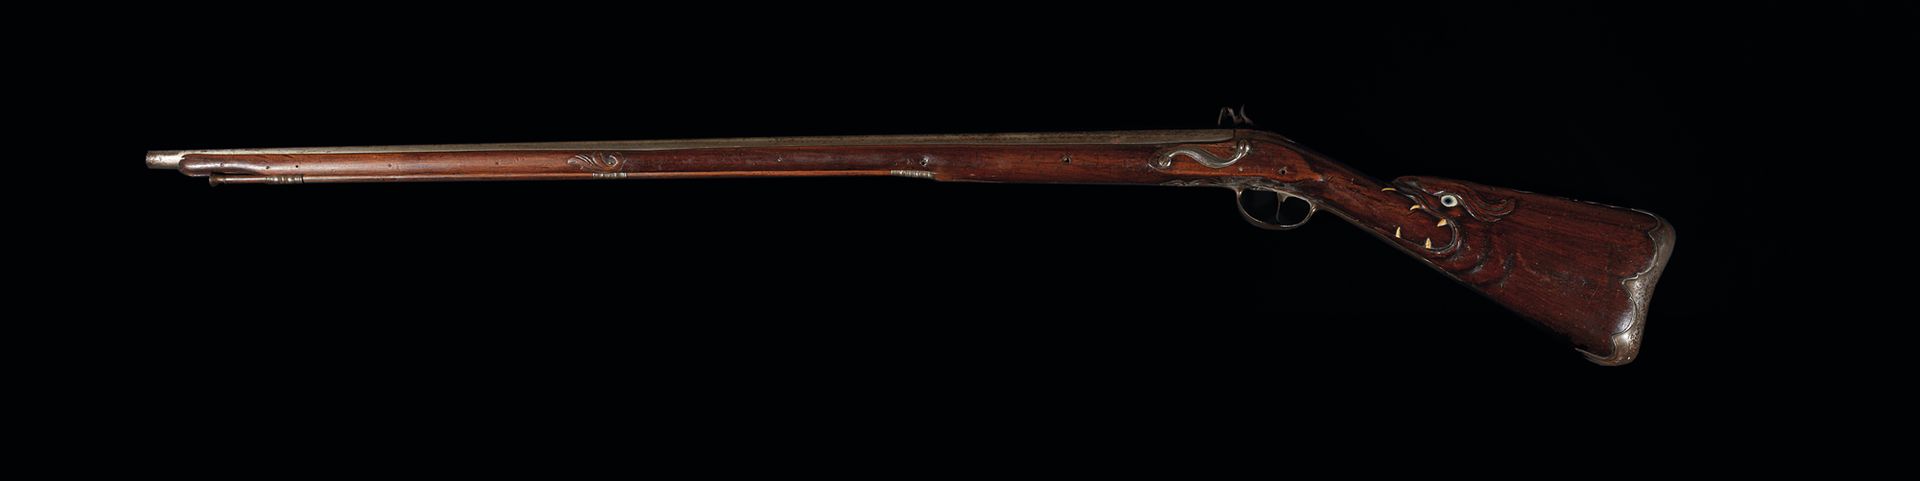 Null Flintlock hunting rifle
Barrel with sides, flat lock, iron trimming and wal&hellip;